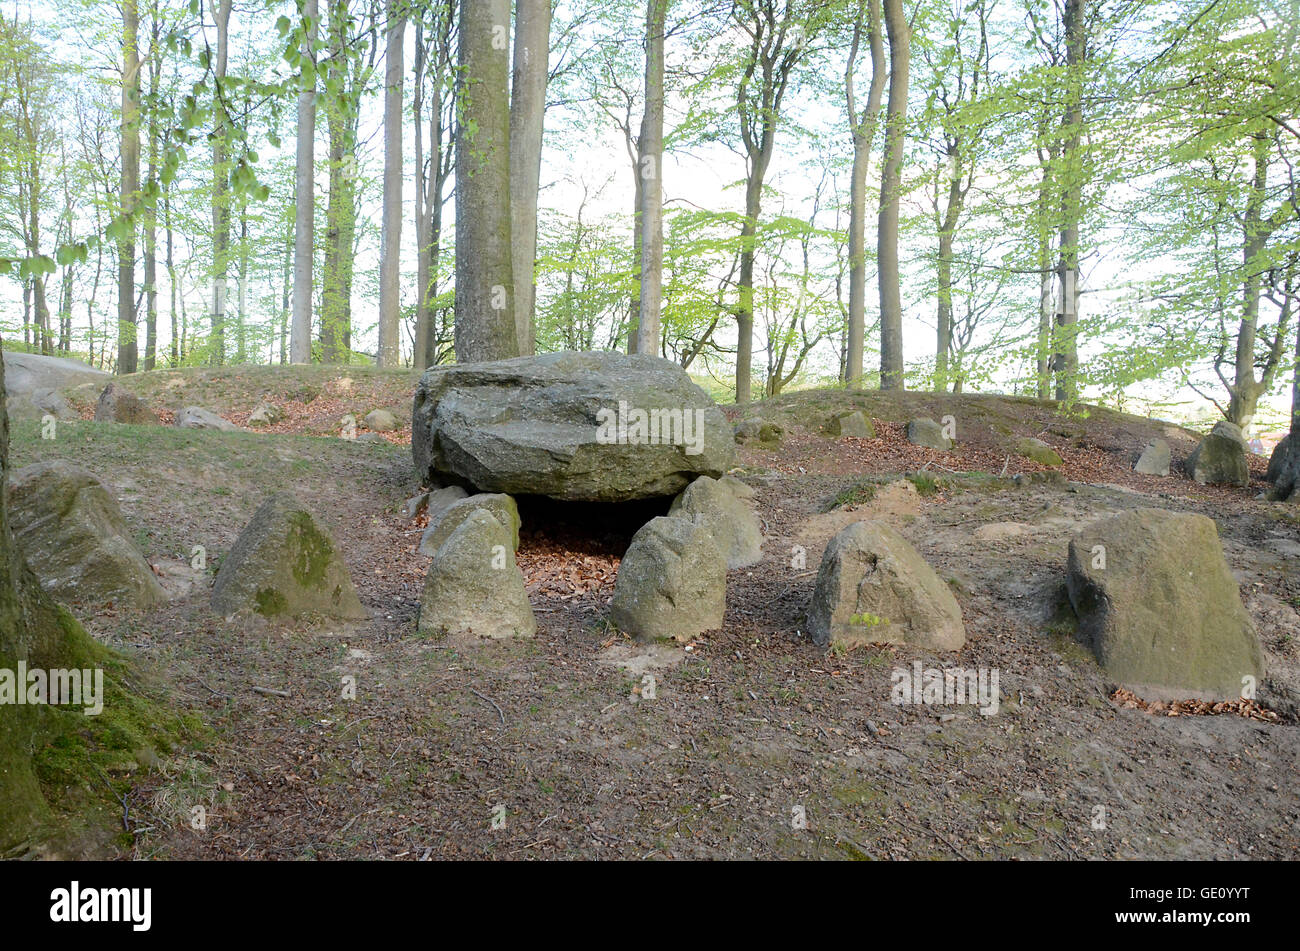 The Bronze Age grave mounds at Blomeskobbel in Denmark. They hide deep in the forest but appear in good condition. Stock Photo